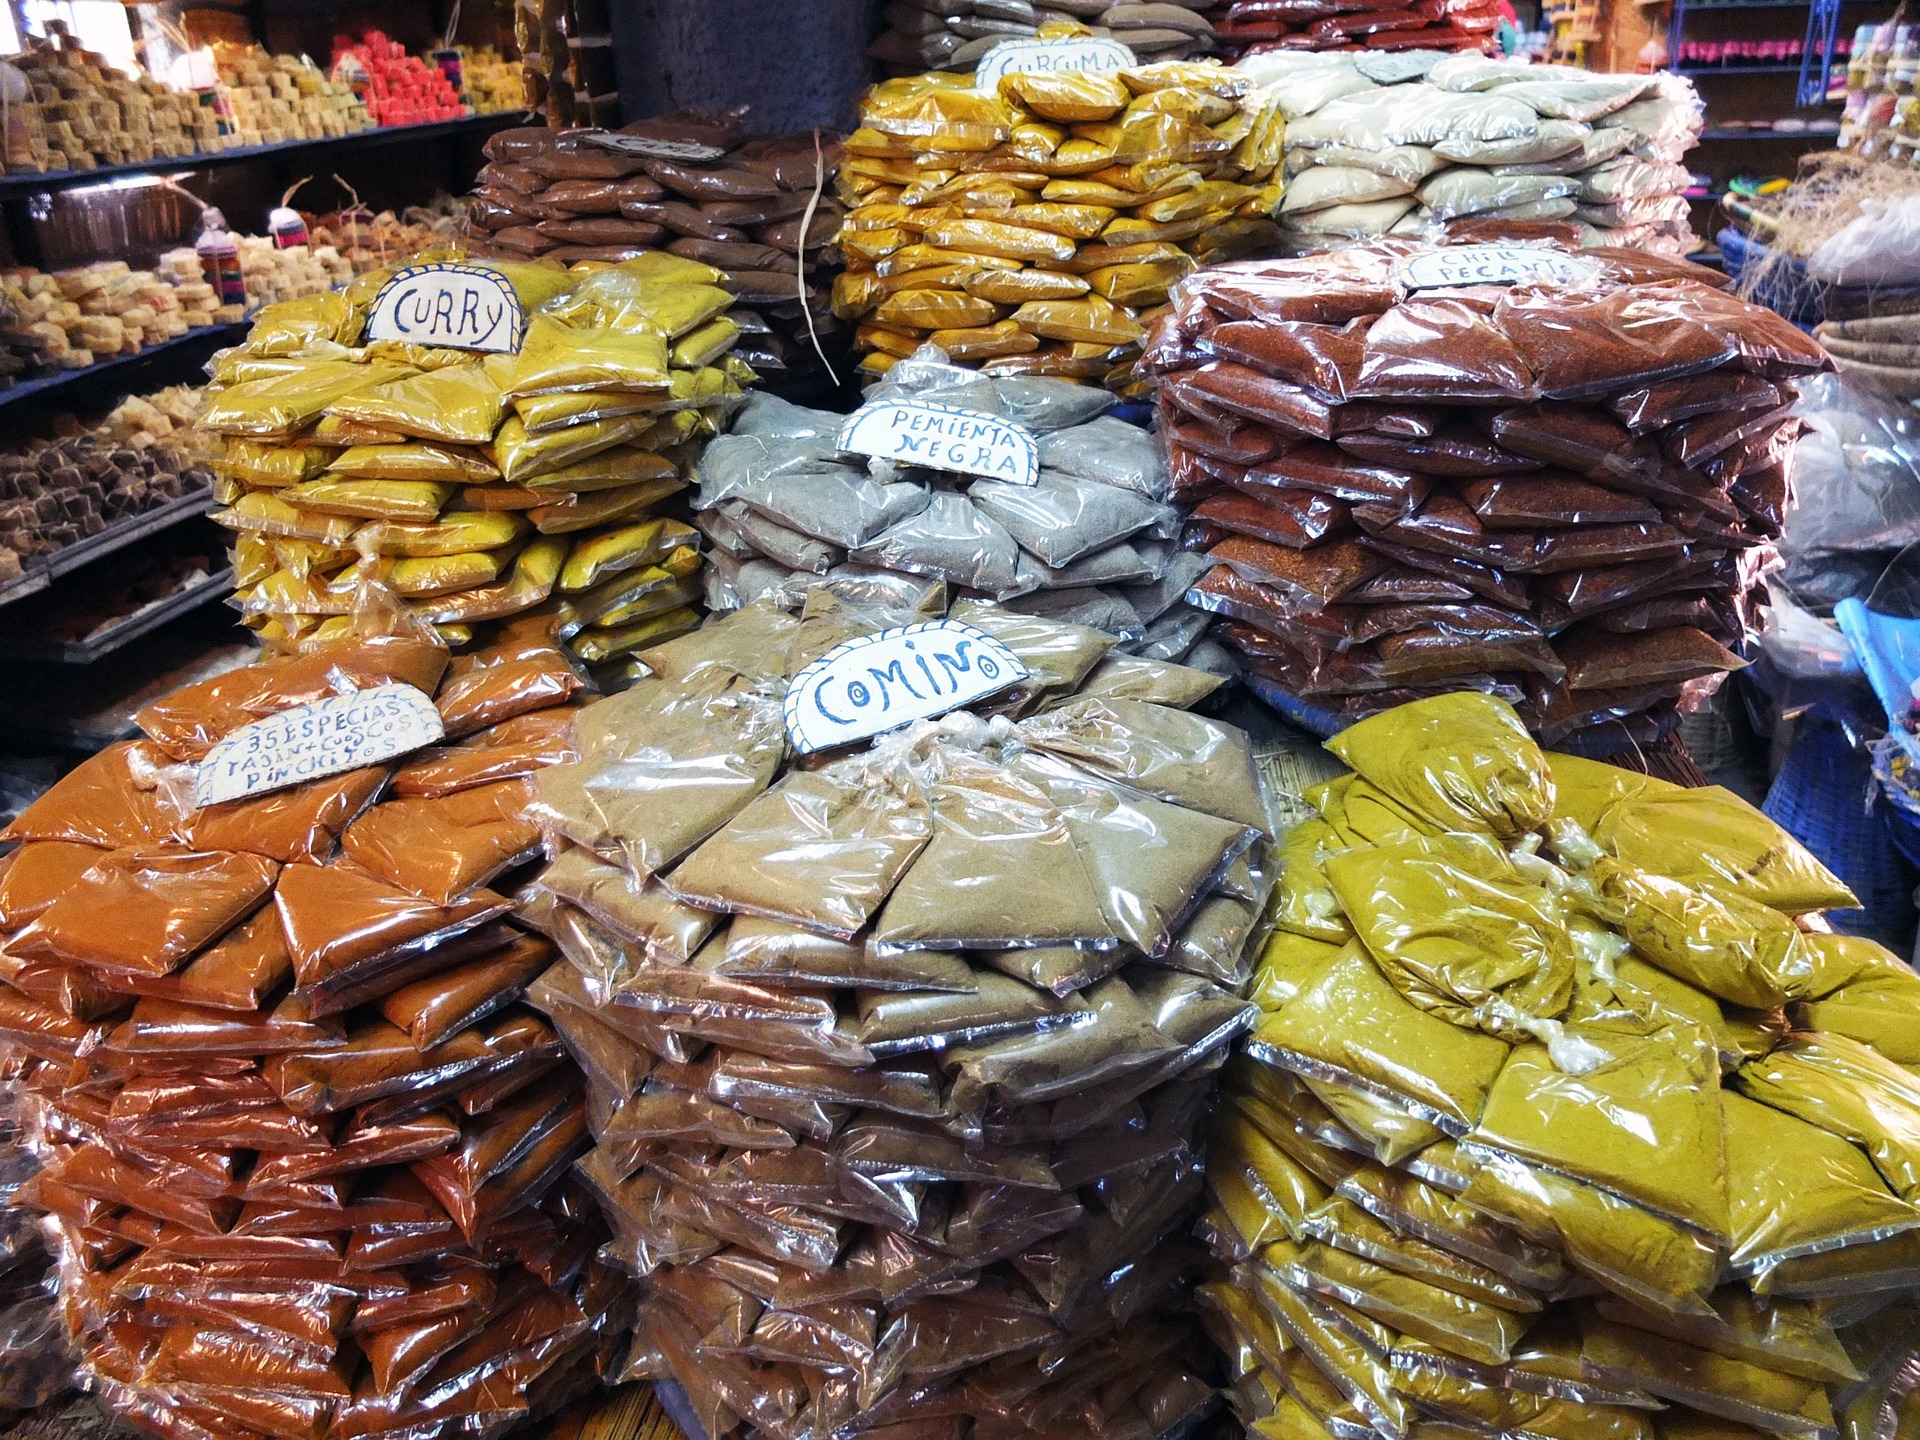 An array of spices can be found in the spice market.